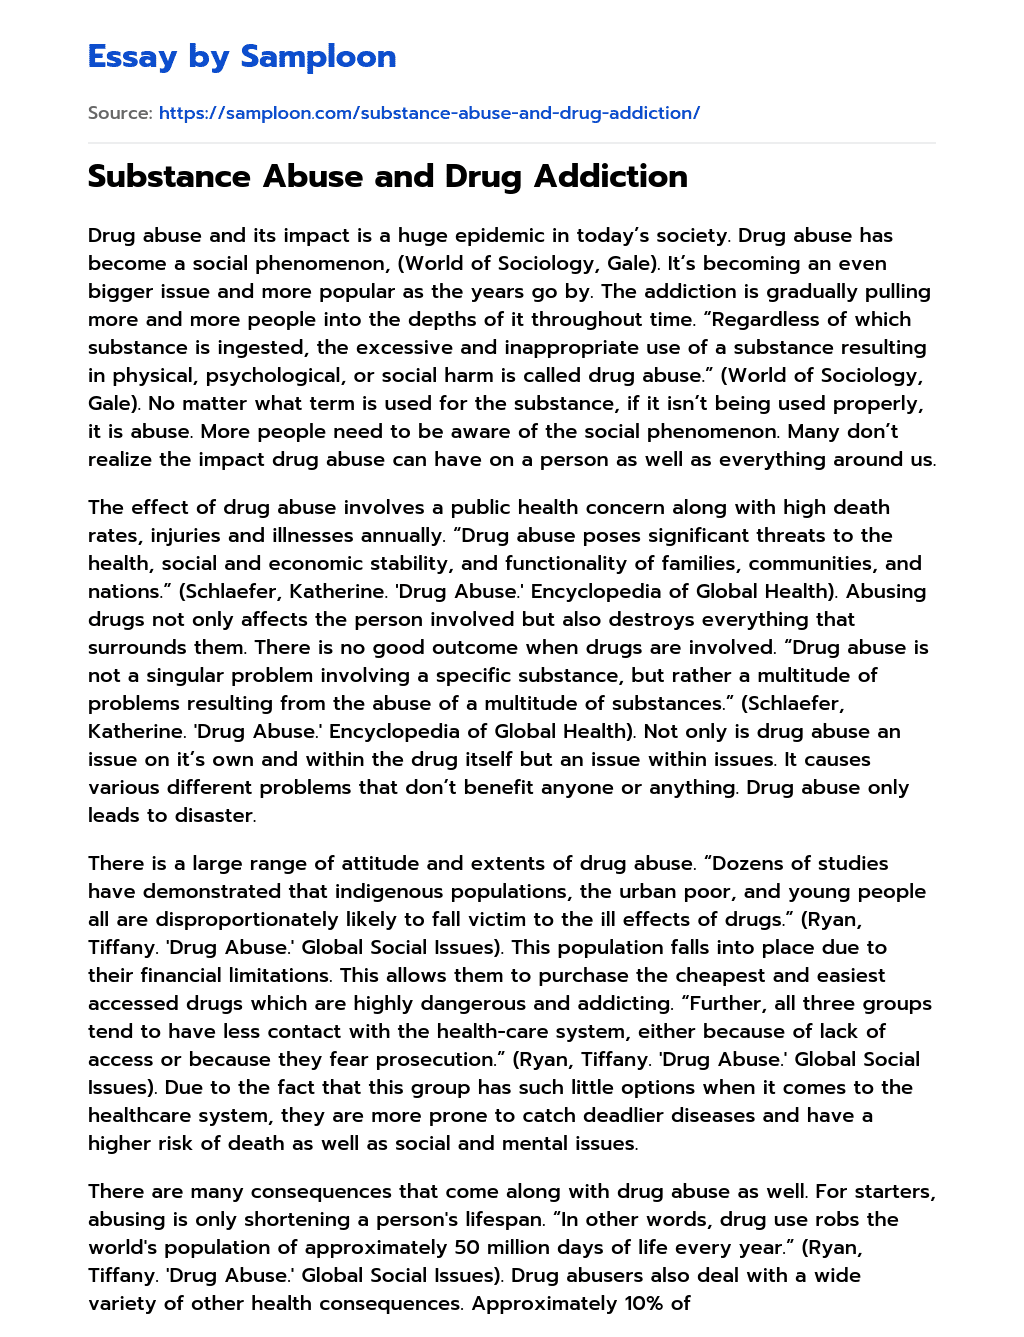 essay paper on substance dependence